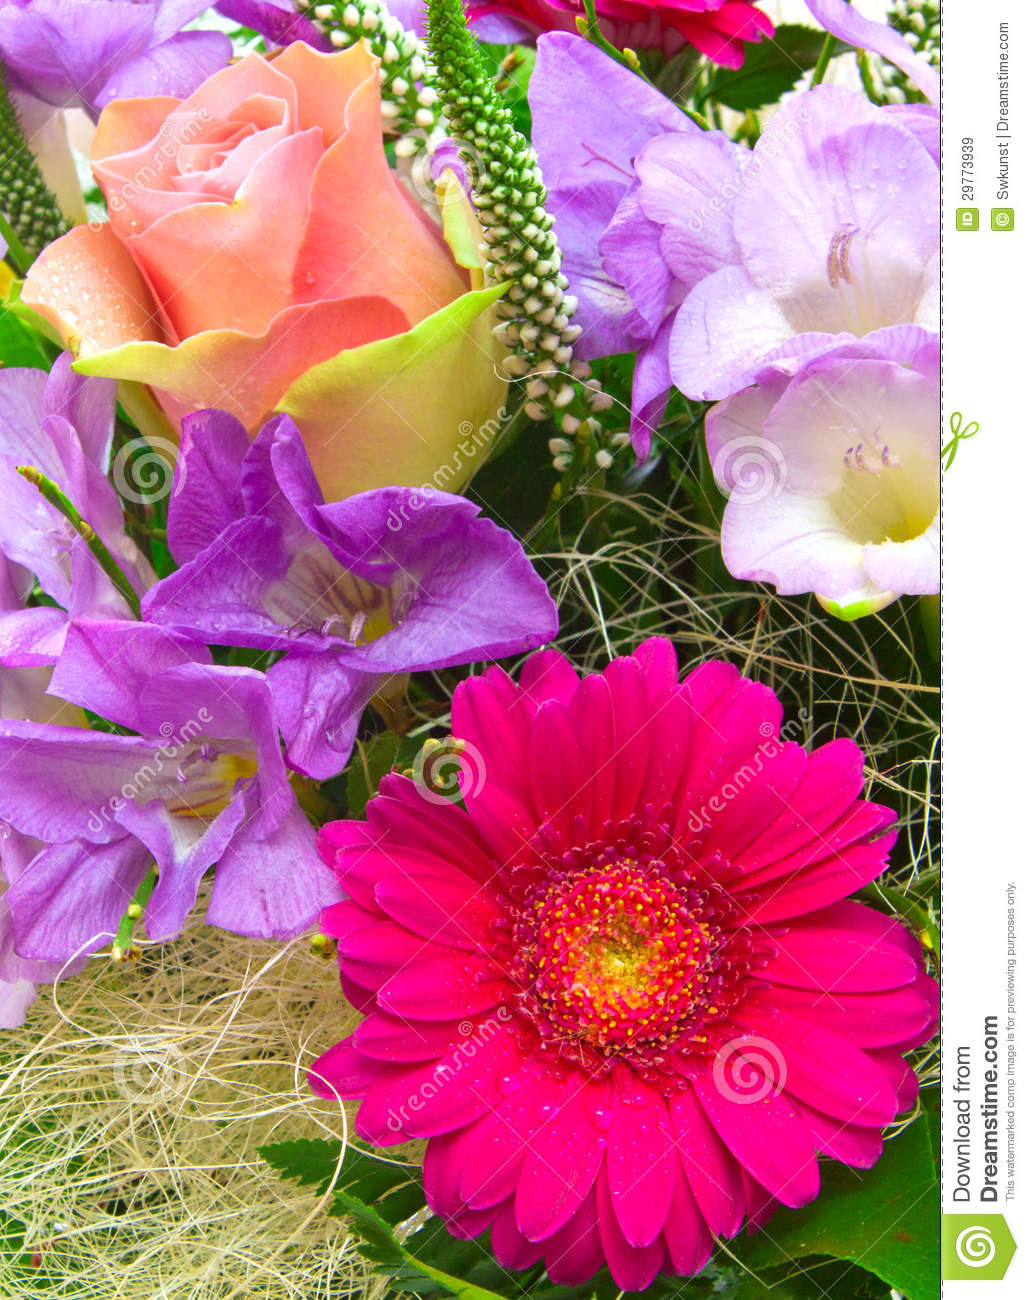 Colorful Flower Bouquet  Royalty Free Stock Images   Image  29773939